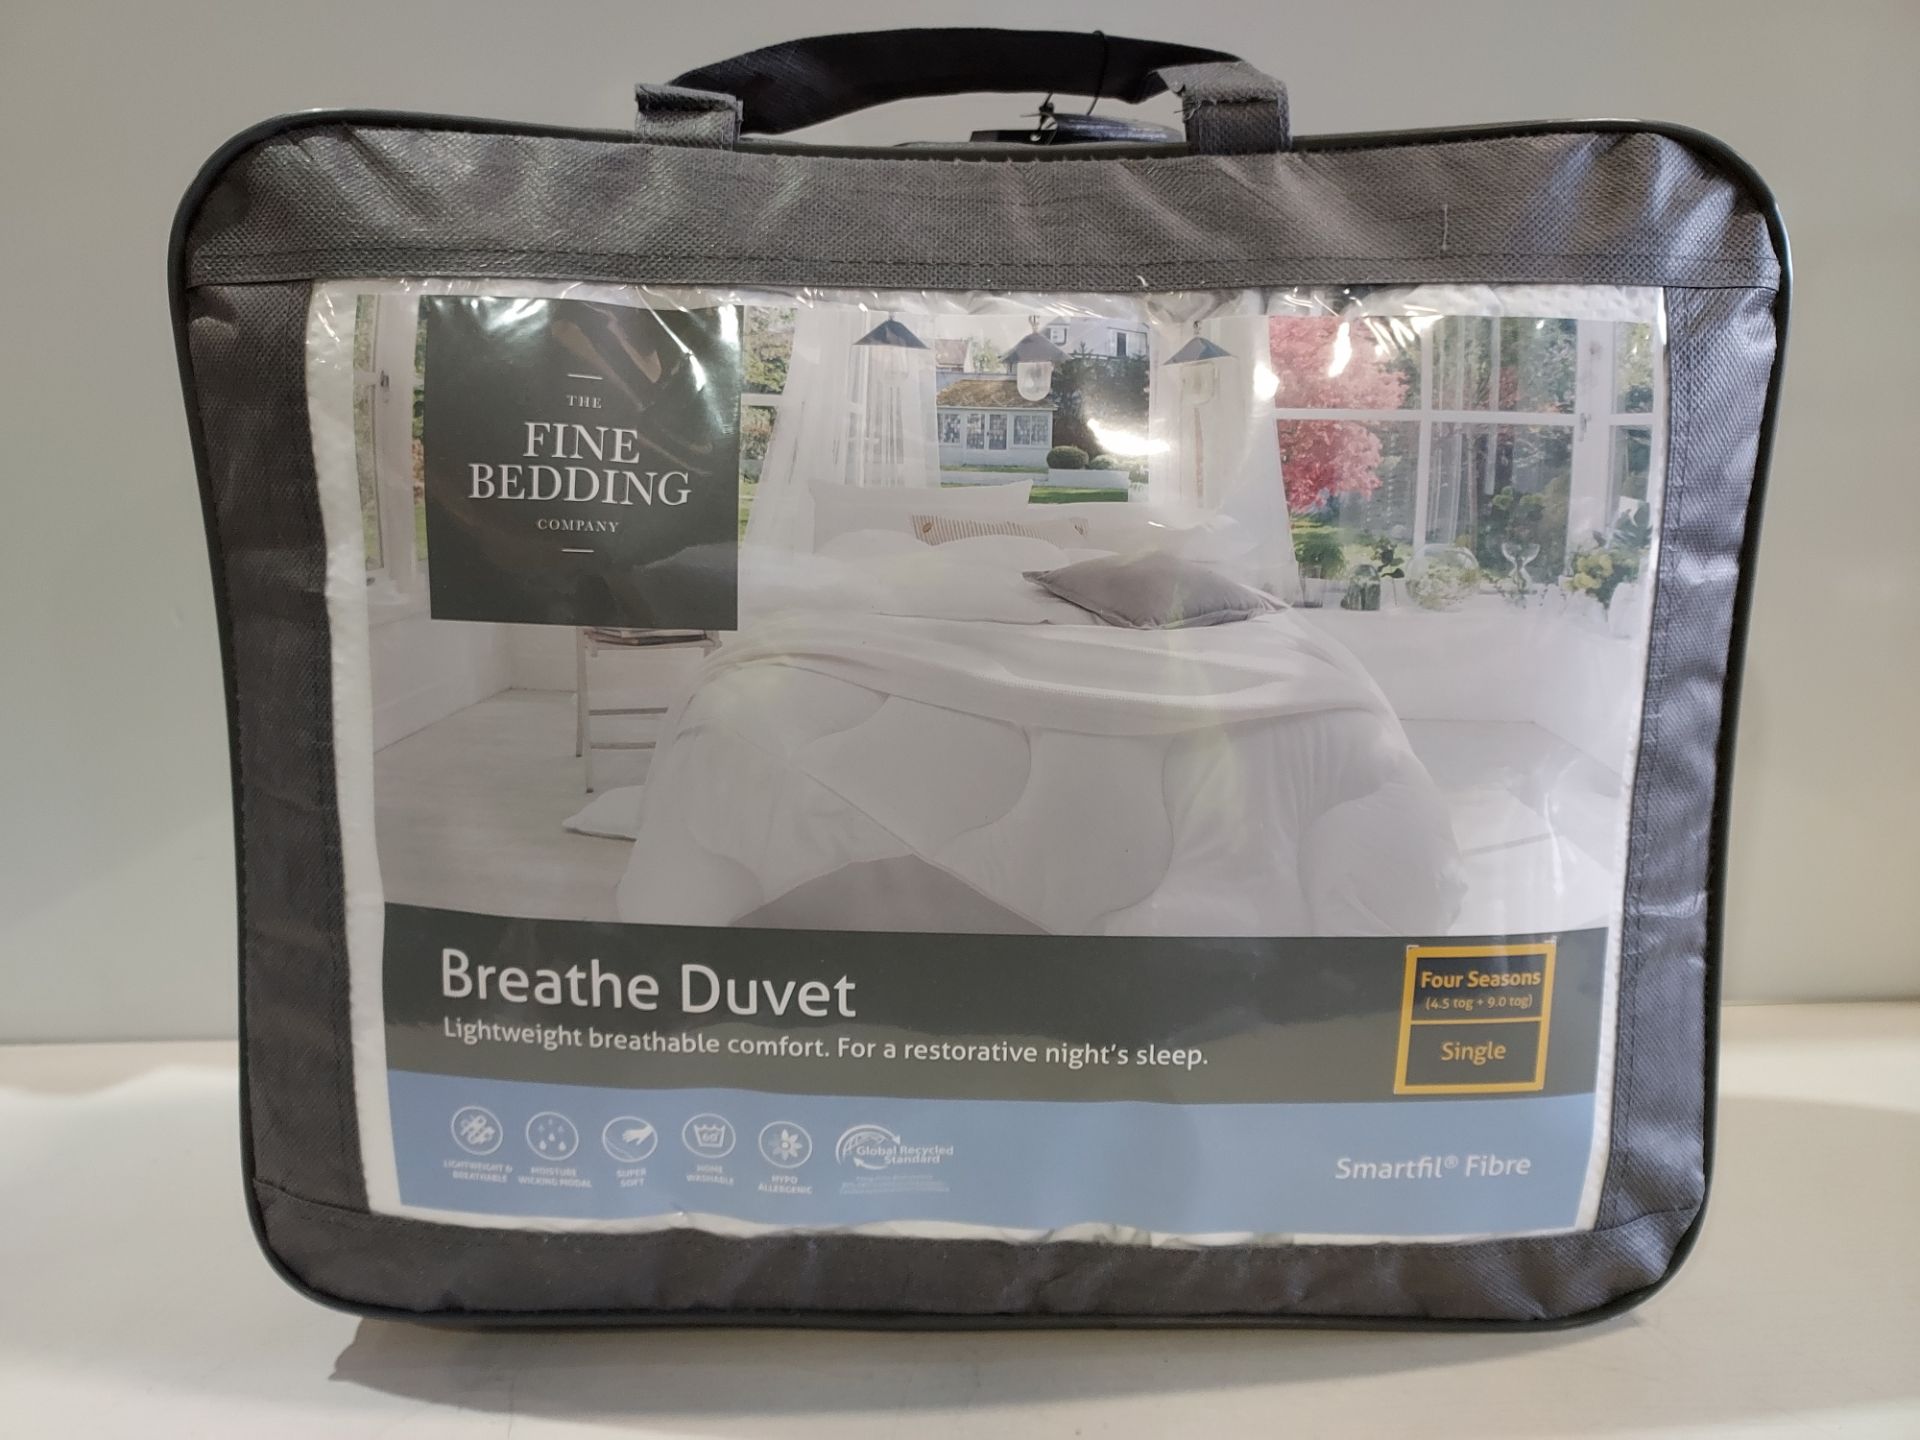 4 X BRAND NEW THE FINE BEDDING COMPANY BREATHE / SPUNDOWN DUVETS - WASHABLE - QUICK DRYING -